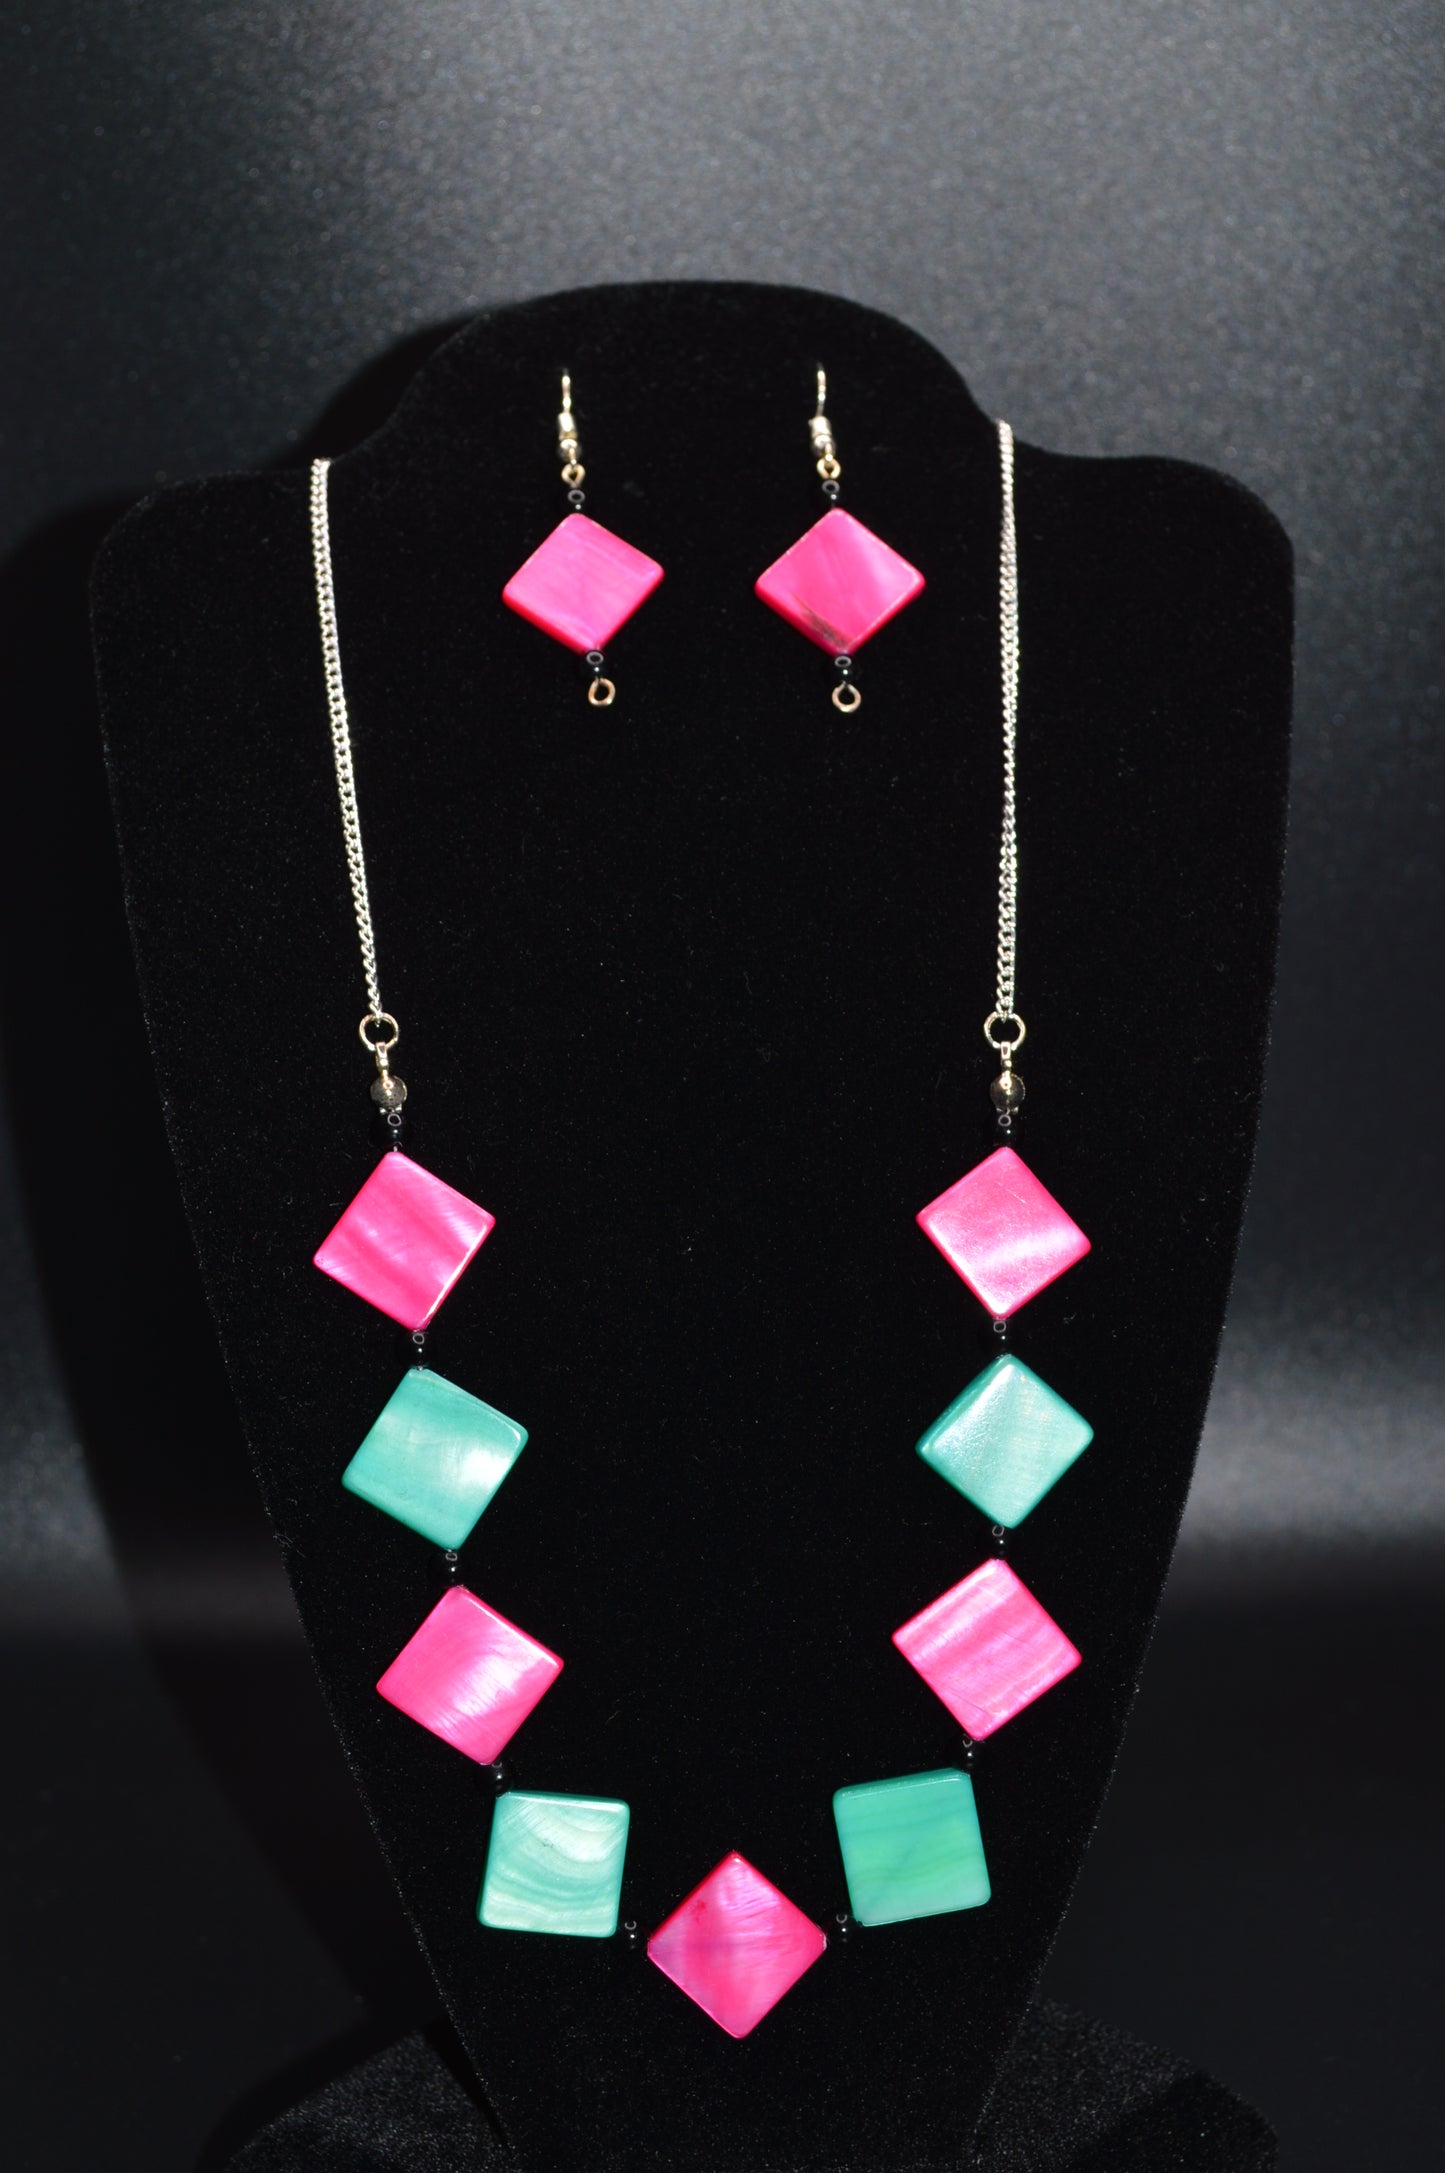 Pink and Aqua Mother of Pearl Diamonds with Black Beads Necklace and Earring Set